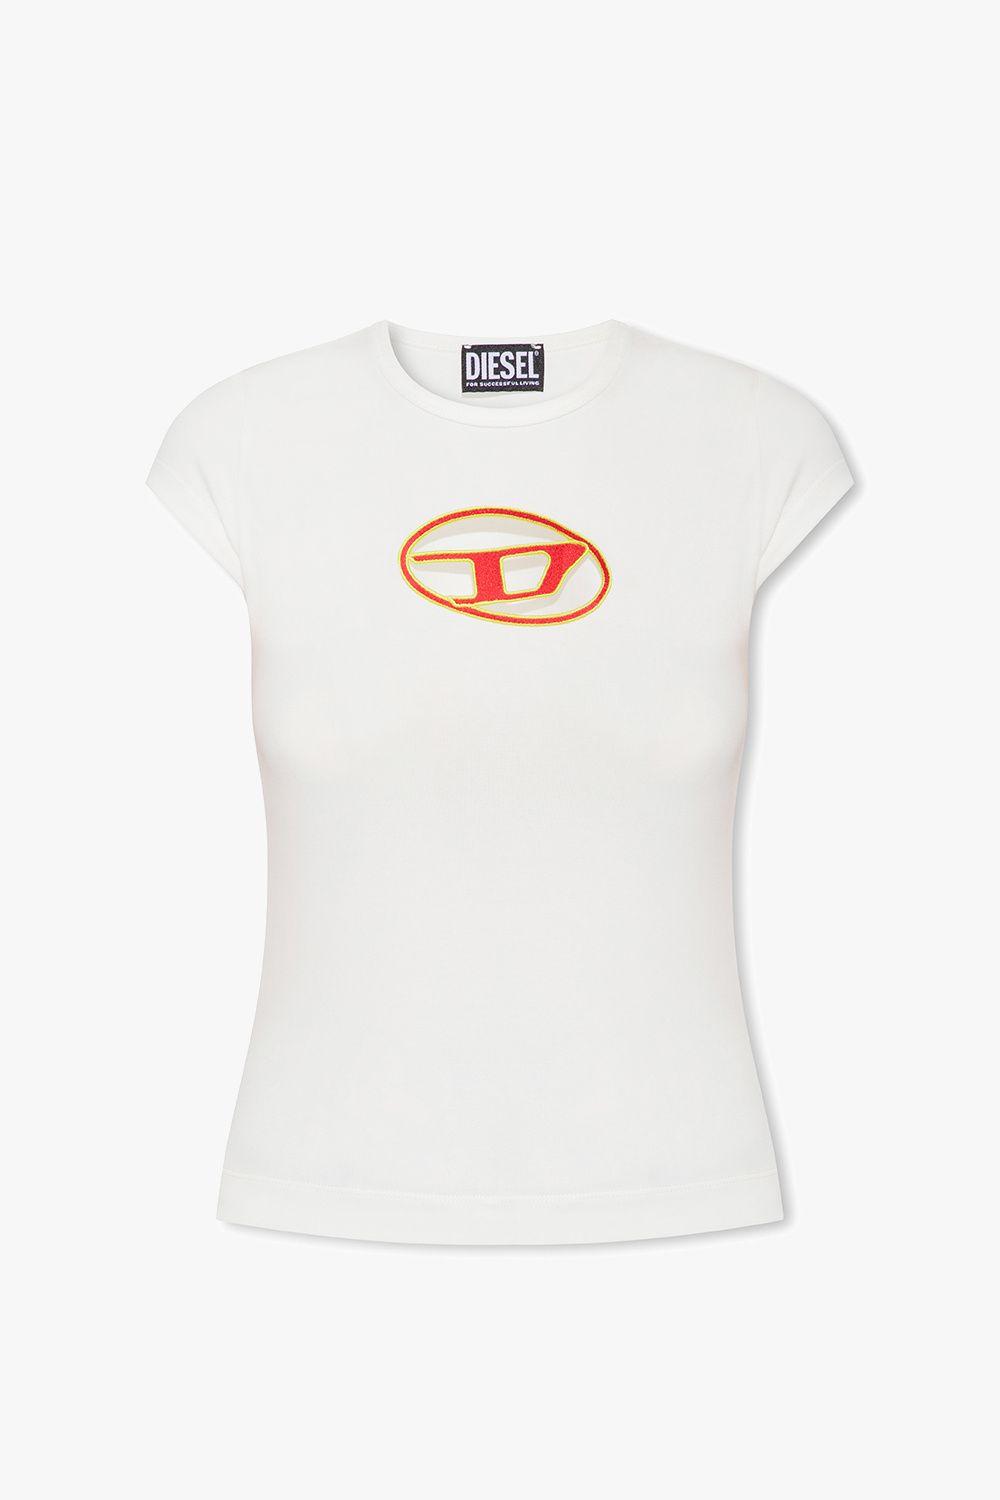 DIESEL 't-angie' T-shirt With Logo in White | Lyst